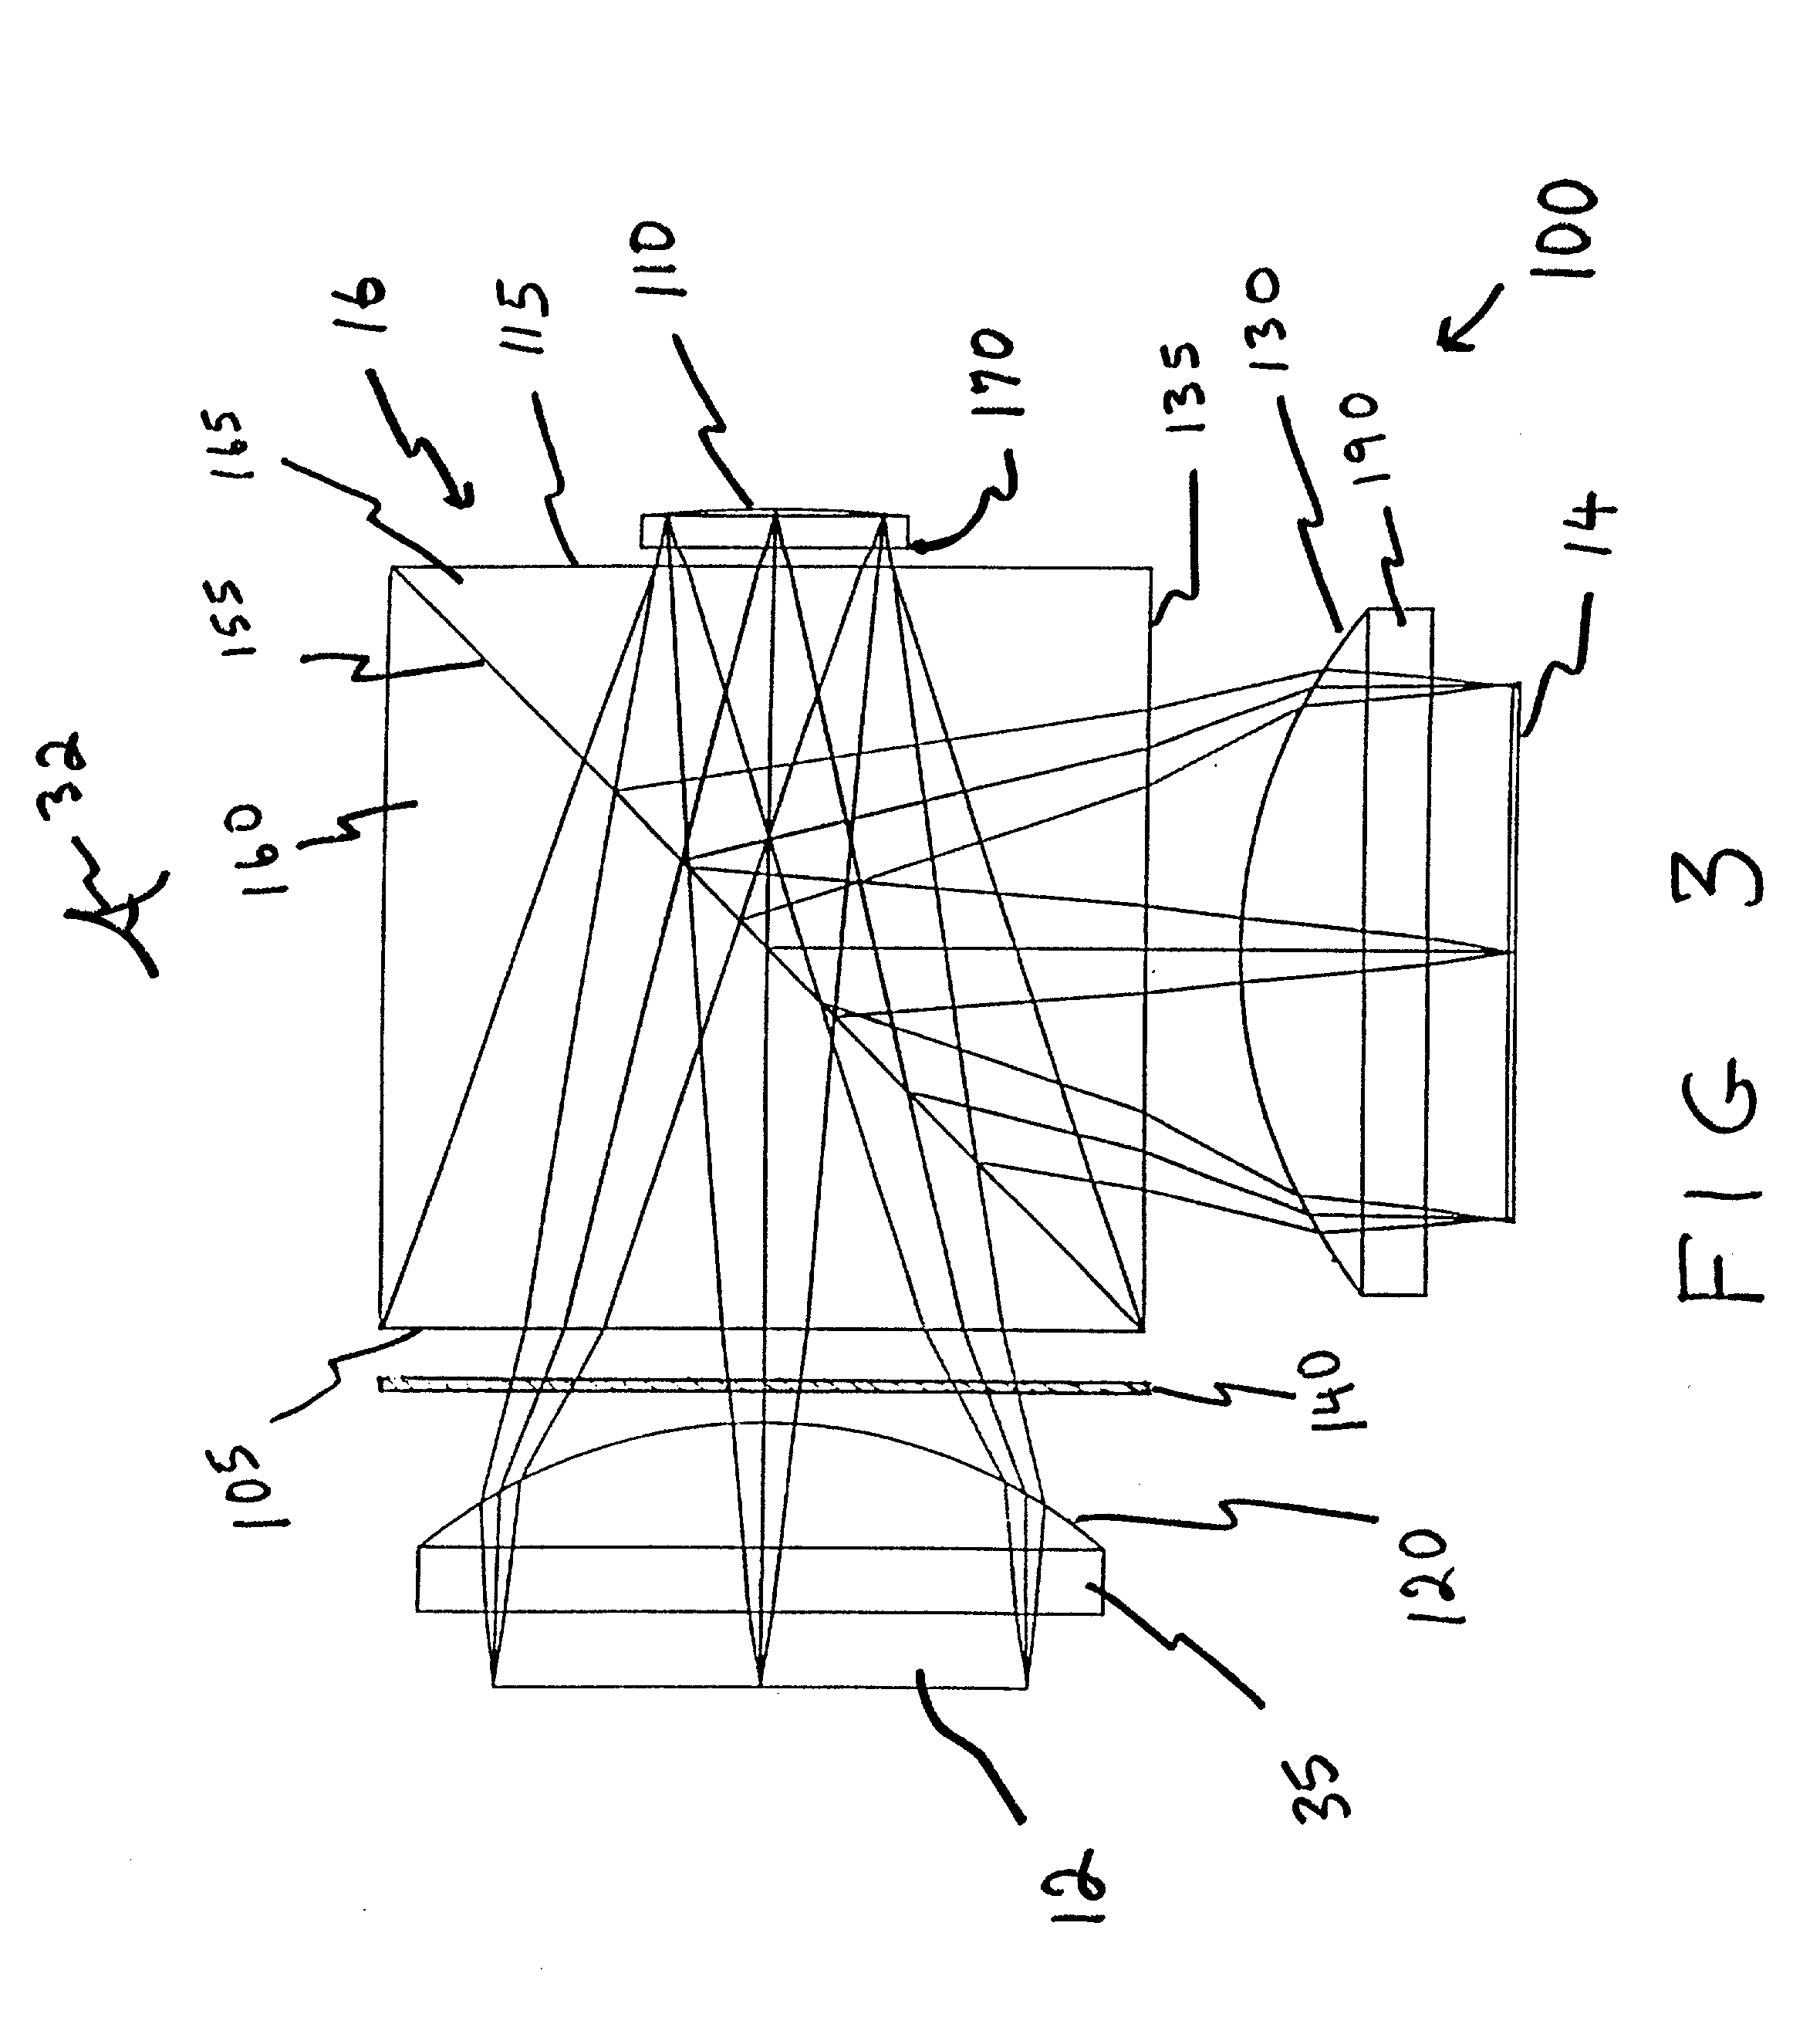 Optical system for miniature personal displays using reflective light valves